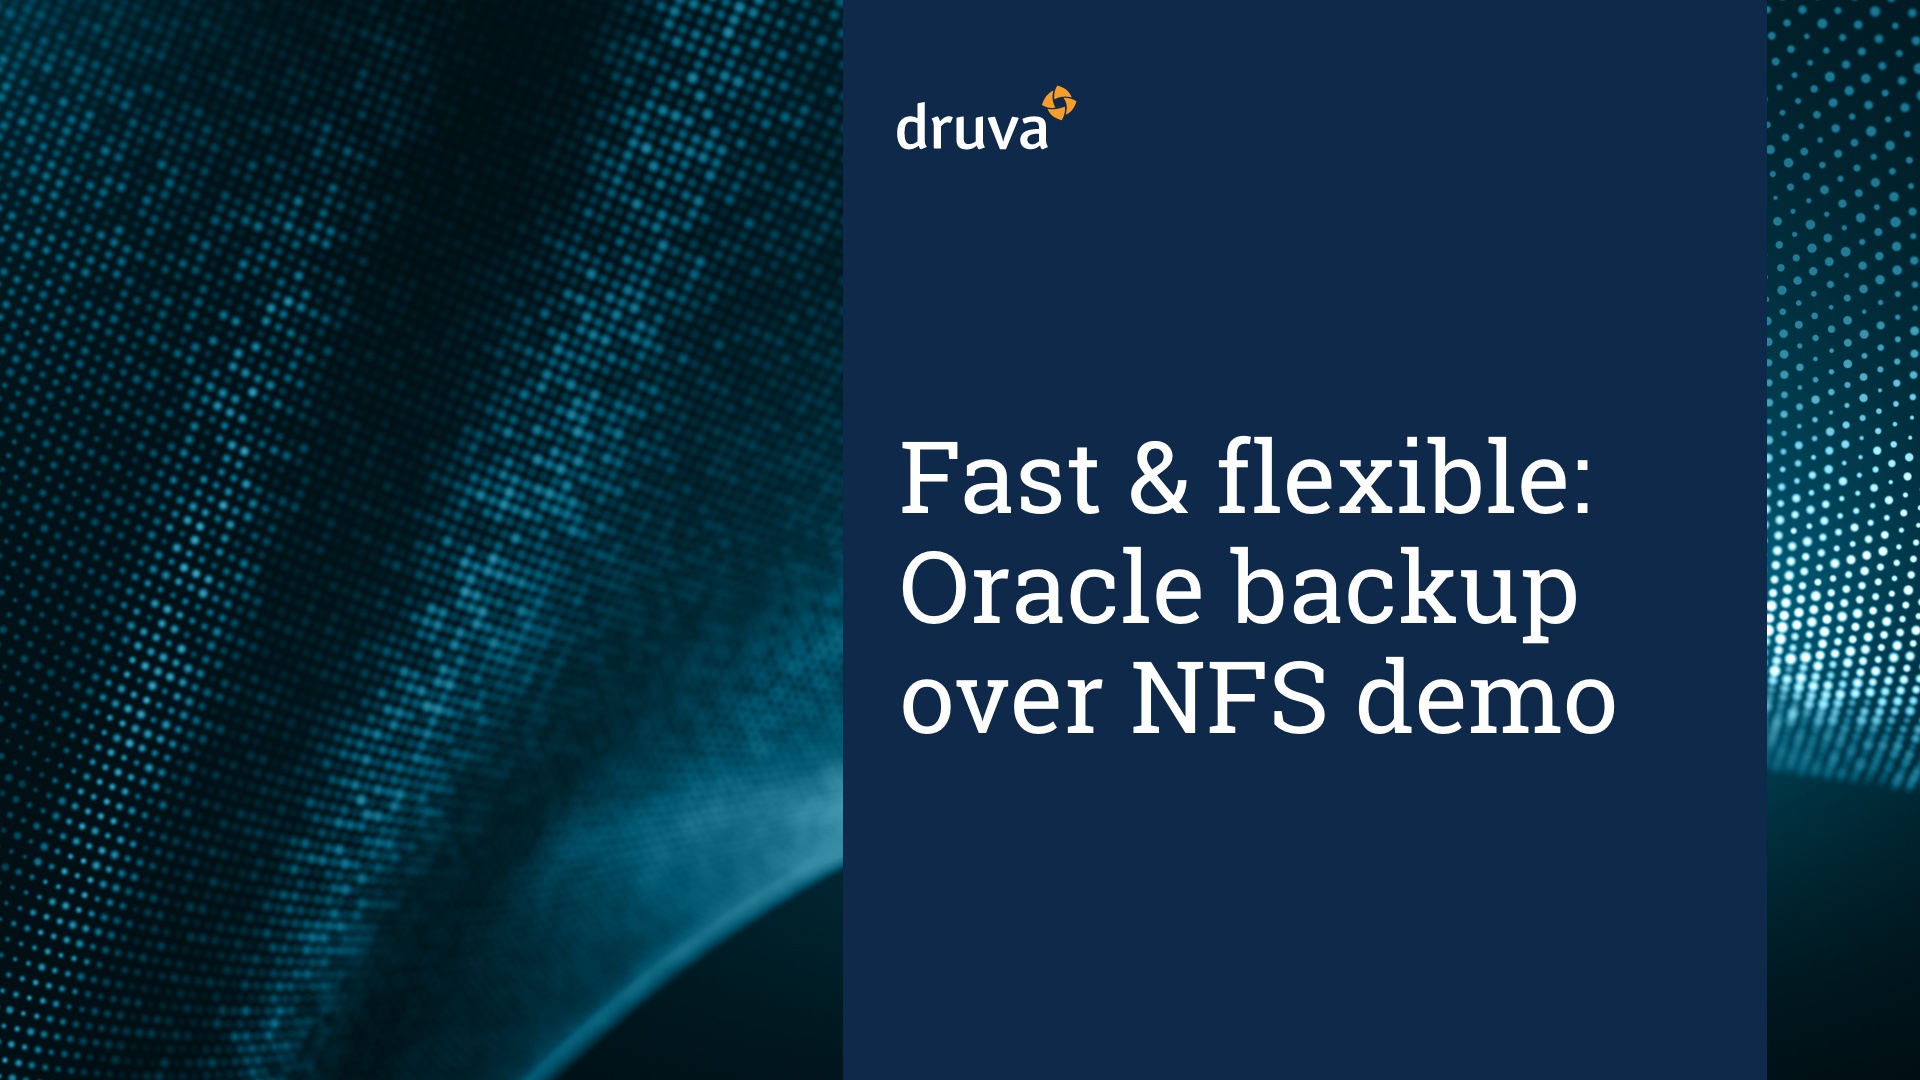 Oracle backup over NFS demo